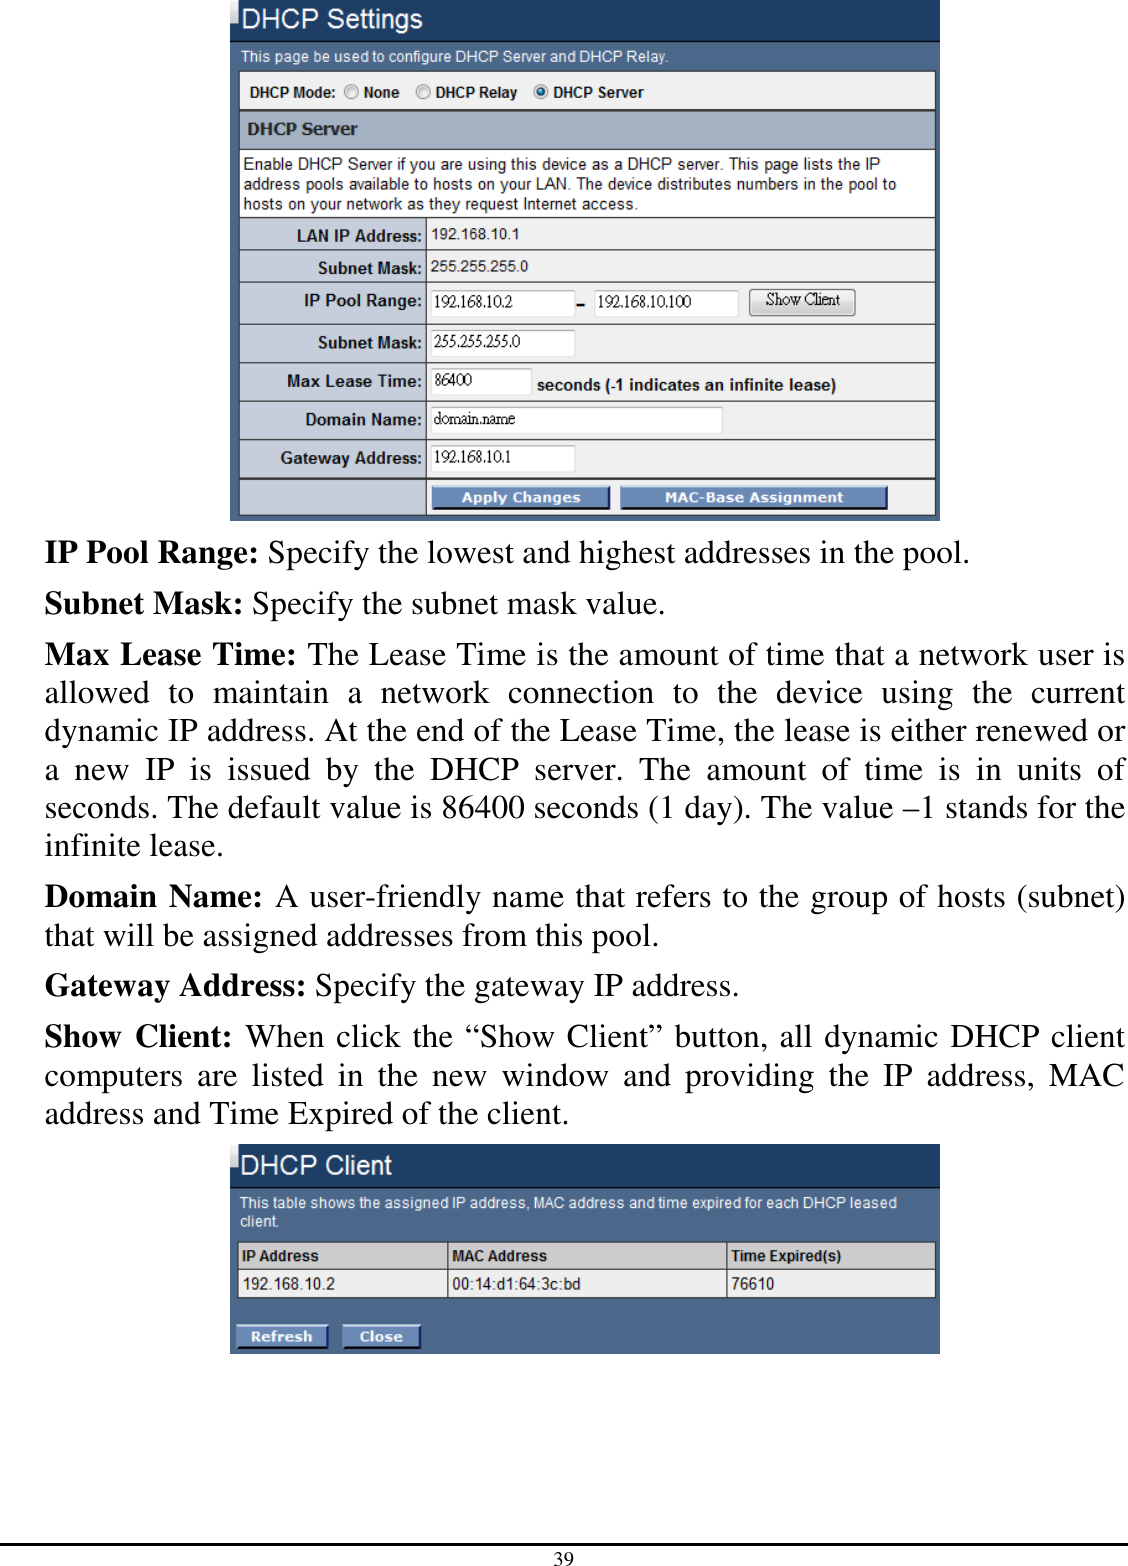 39  IP Pool Range: Specify the lowest and highest addresses in the pool. Subnet Mask: Specify the subnet mask value. Max Lease Time: The Lease Time is the amount of time that a network user is allowed  to  maintain  a  network  connection  to  the  device  using  the  current dynamic IP address. At the end of the Lease Time, the lease is either renewed or a  new  IP  is  issued  by  the  DHCP  server.  The  amount  of  time  is  in  units  of seconds. The default value is 86400 seconds (1 day). The value –1 stands for the infinite lease. Domain Name: A user-friendly name that refers to the group of hosts (subnet) that will be assigned addresses from this pool. Gateway Address: Specify the gateway IP address. Show Client: When click the “Show Client” button, all dynamic DHCP client computers  are  listed  in  the  new  window  and  providing  the  IP  address,  MAC address and Time Expired of the client.  